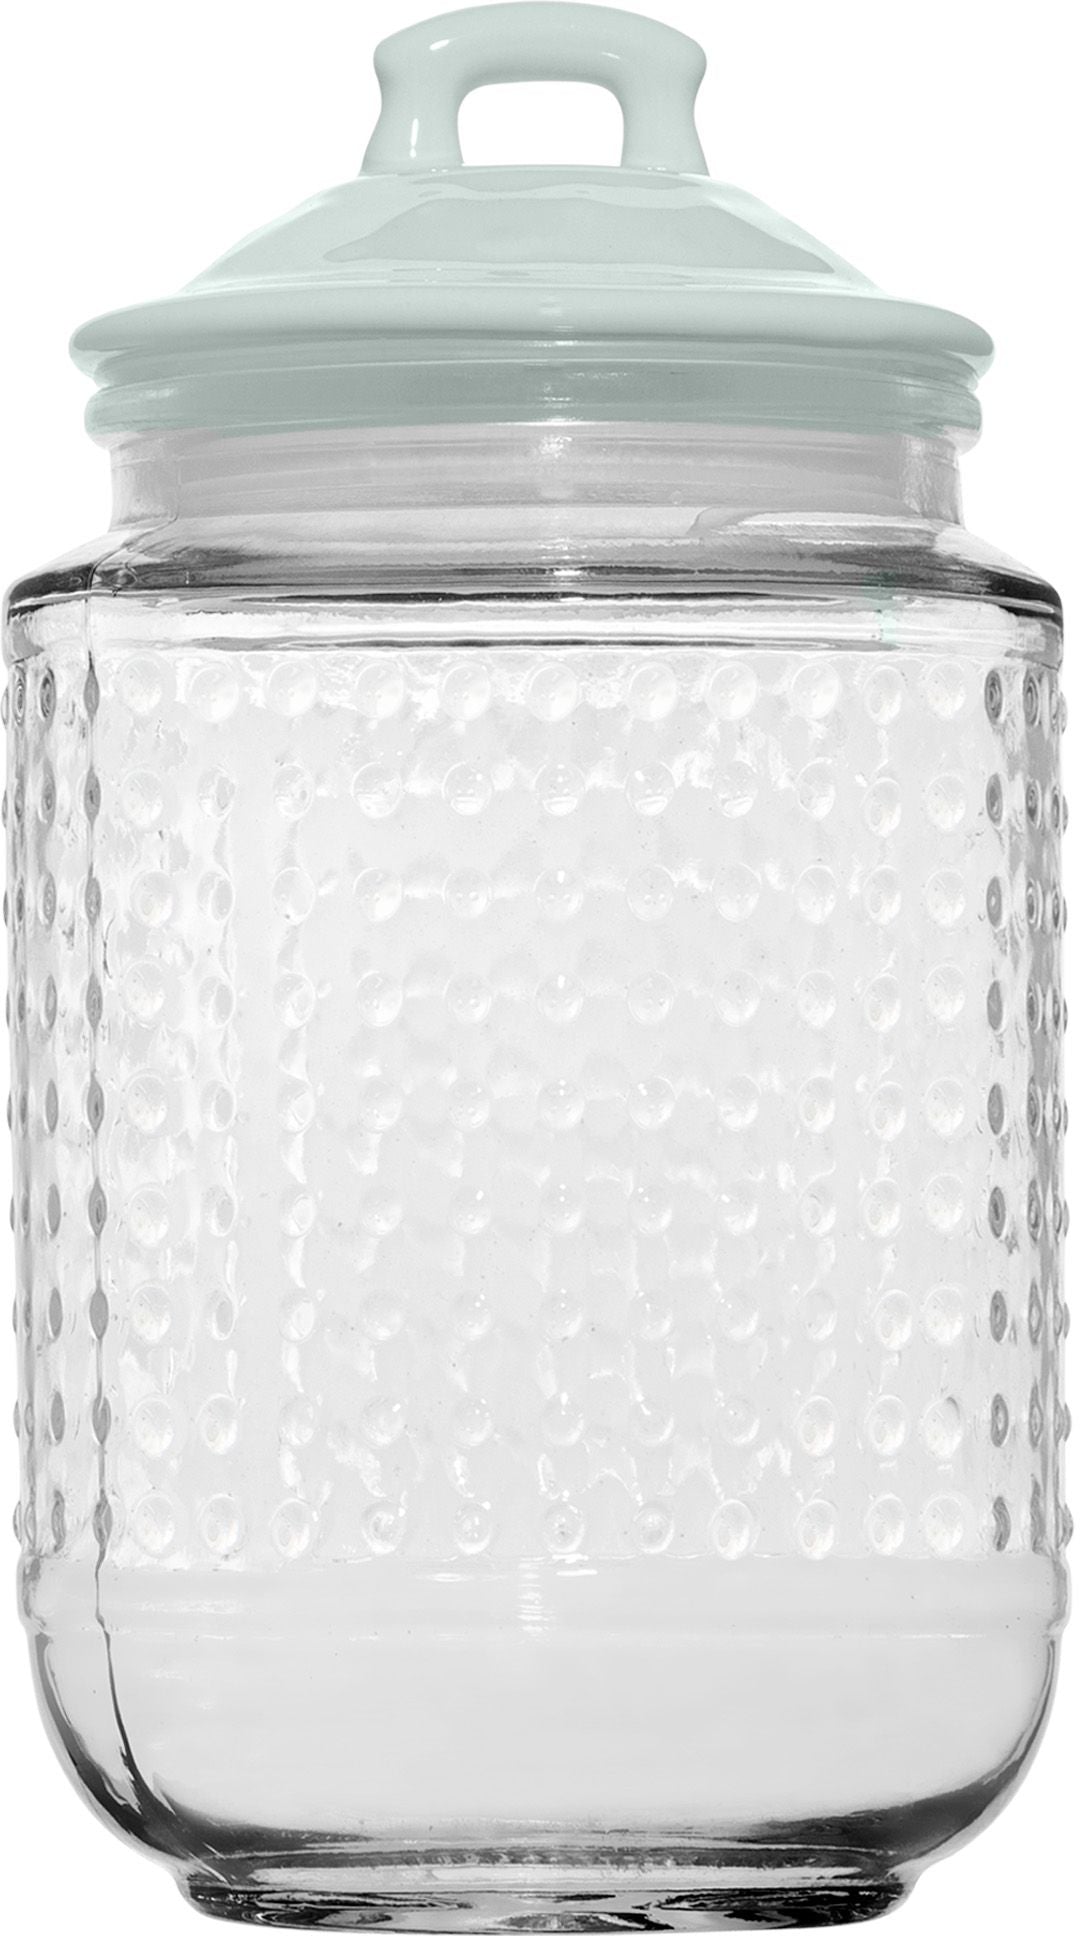 Magnolia Bakery Glass Hobnail Canister (L - Mint)